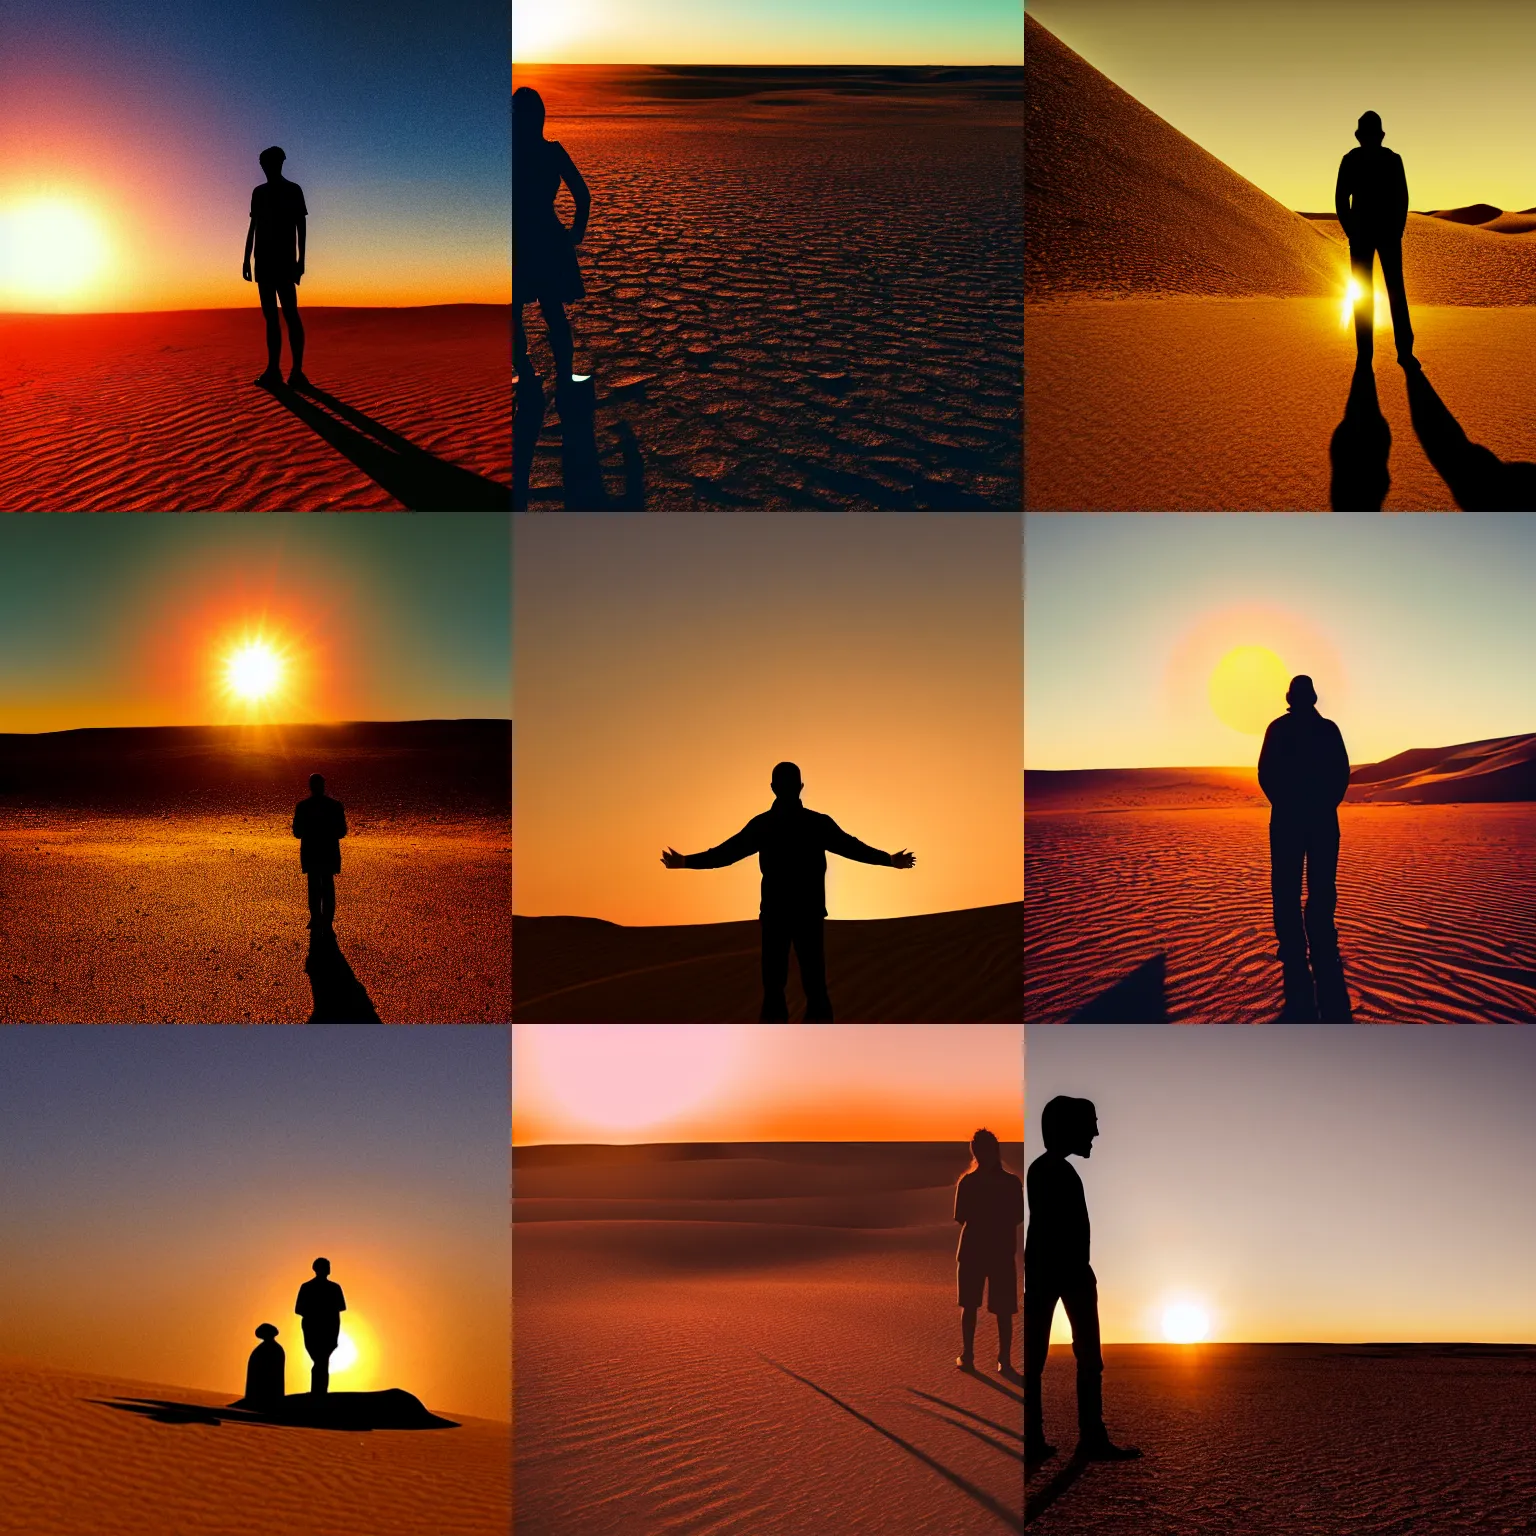 Prompt: a silhouette of a person standing alone in the desert with the sun setting behind them